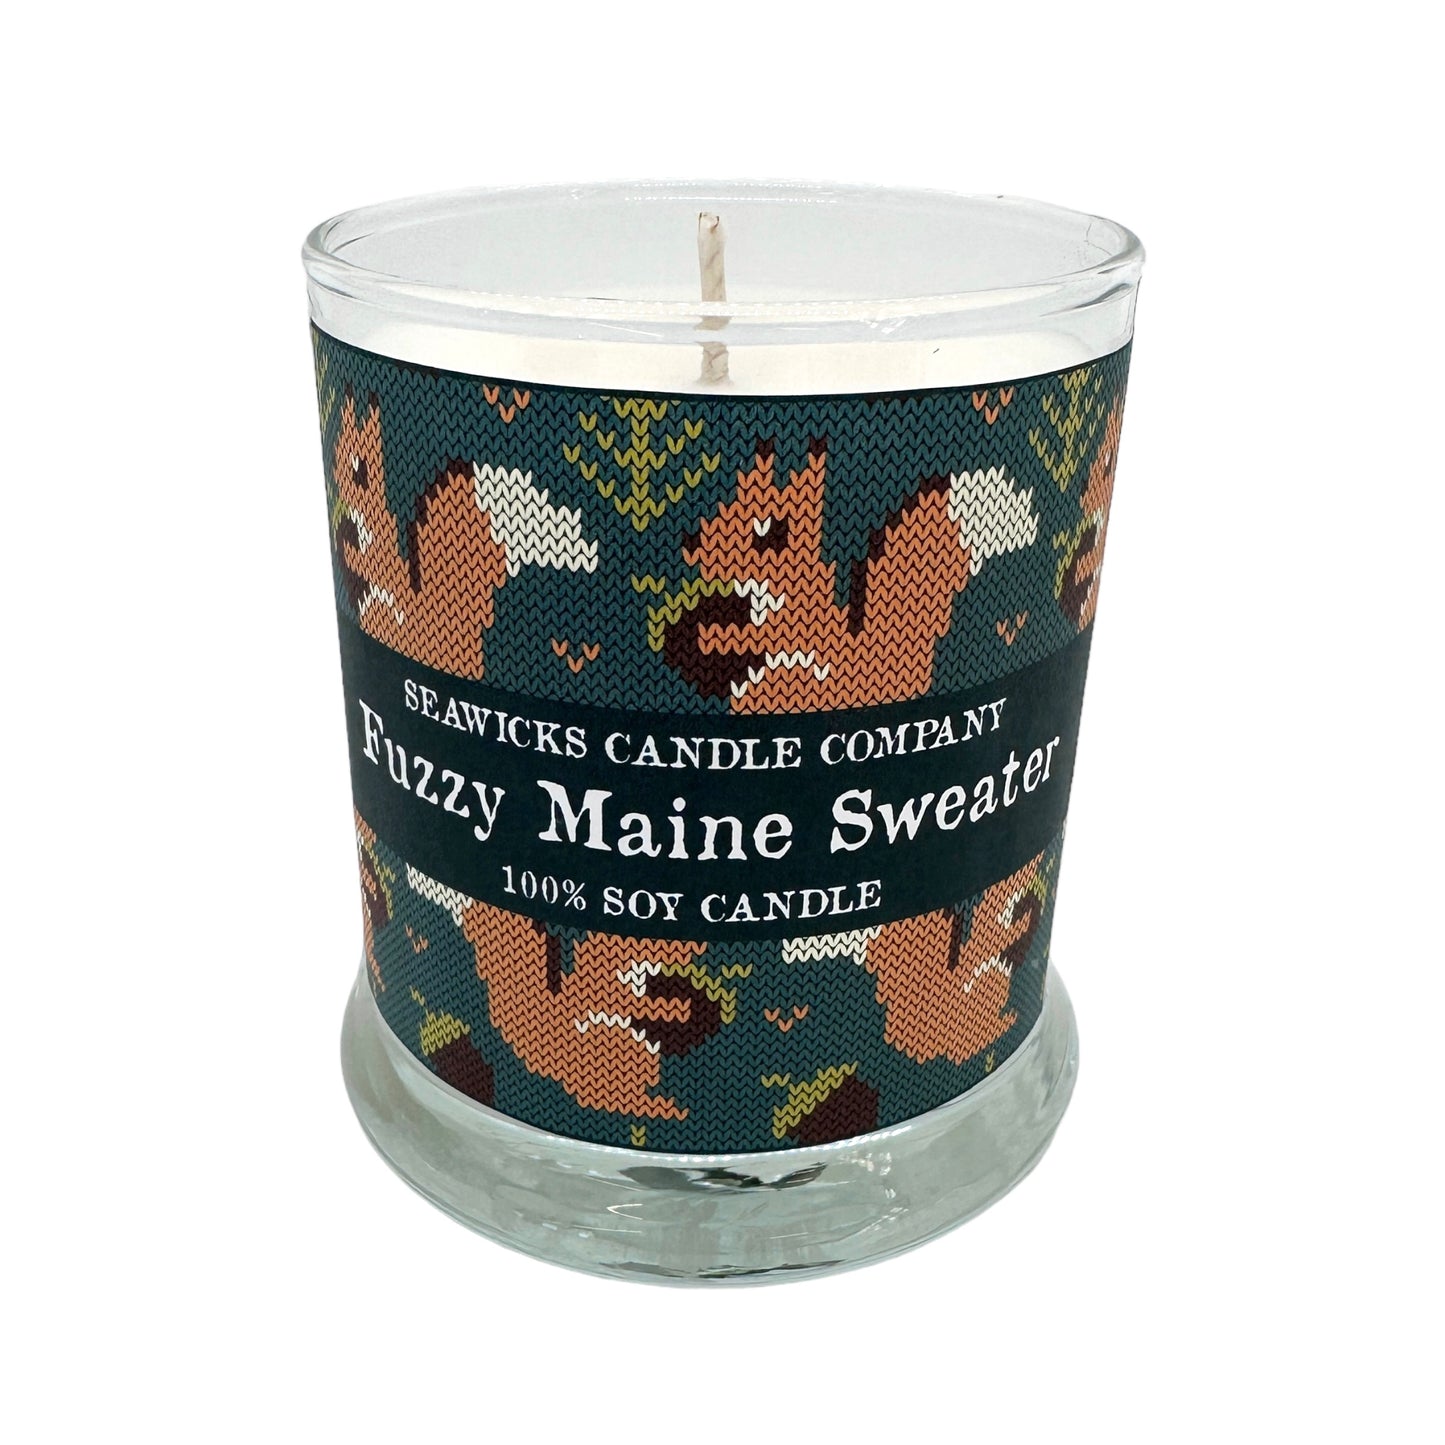 Fuzzy Maine Sweater Candle